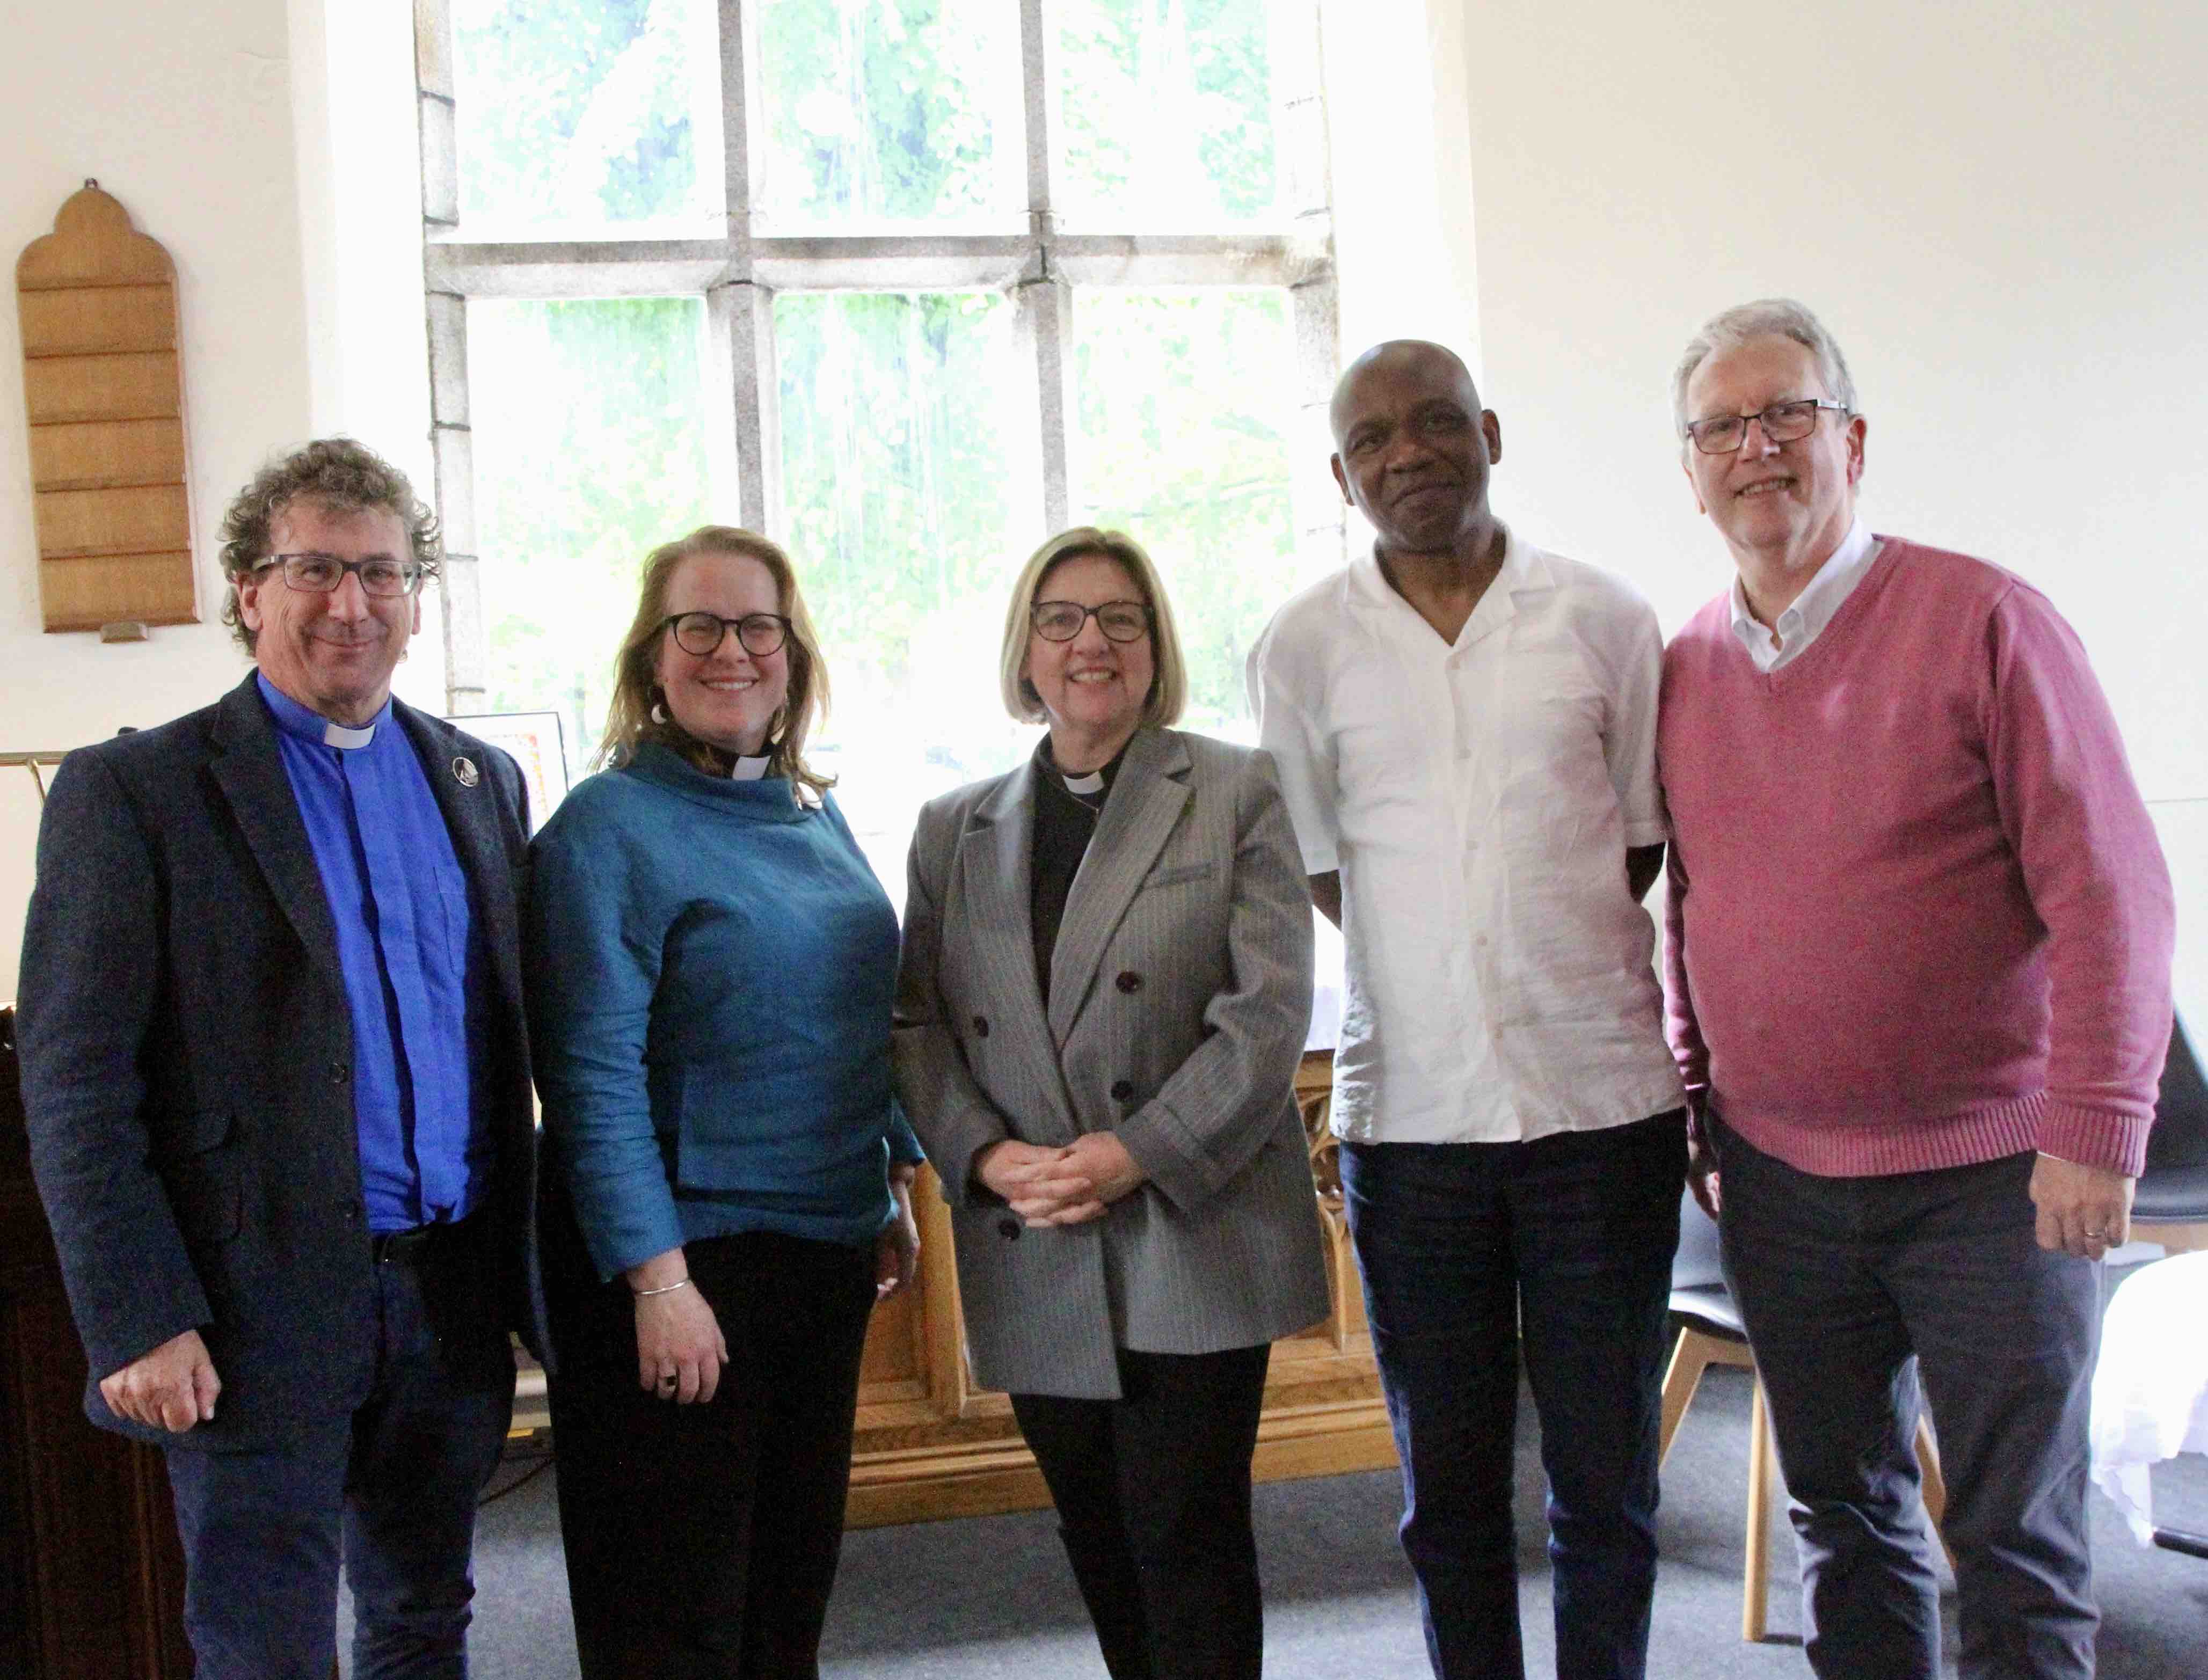 The organising committee: the Revd Alistair Doyle, the Revd Abigail Sines, the Revd Suzanne Cousins, Femi Atoyebe and David Reynolds.